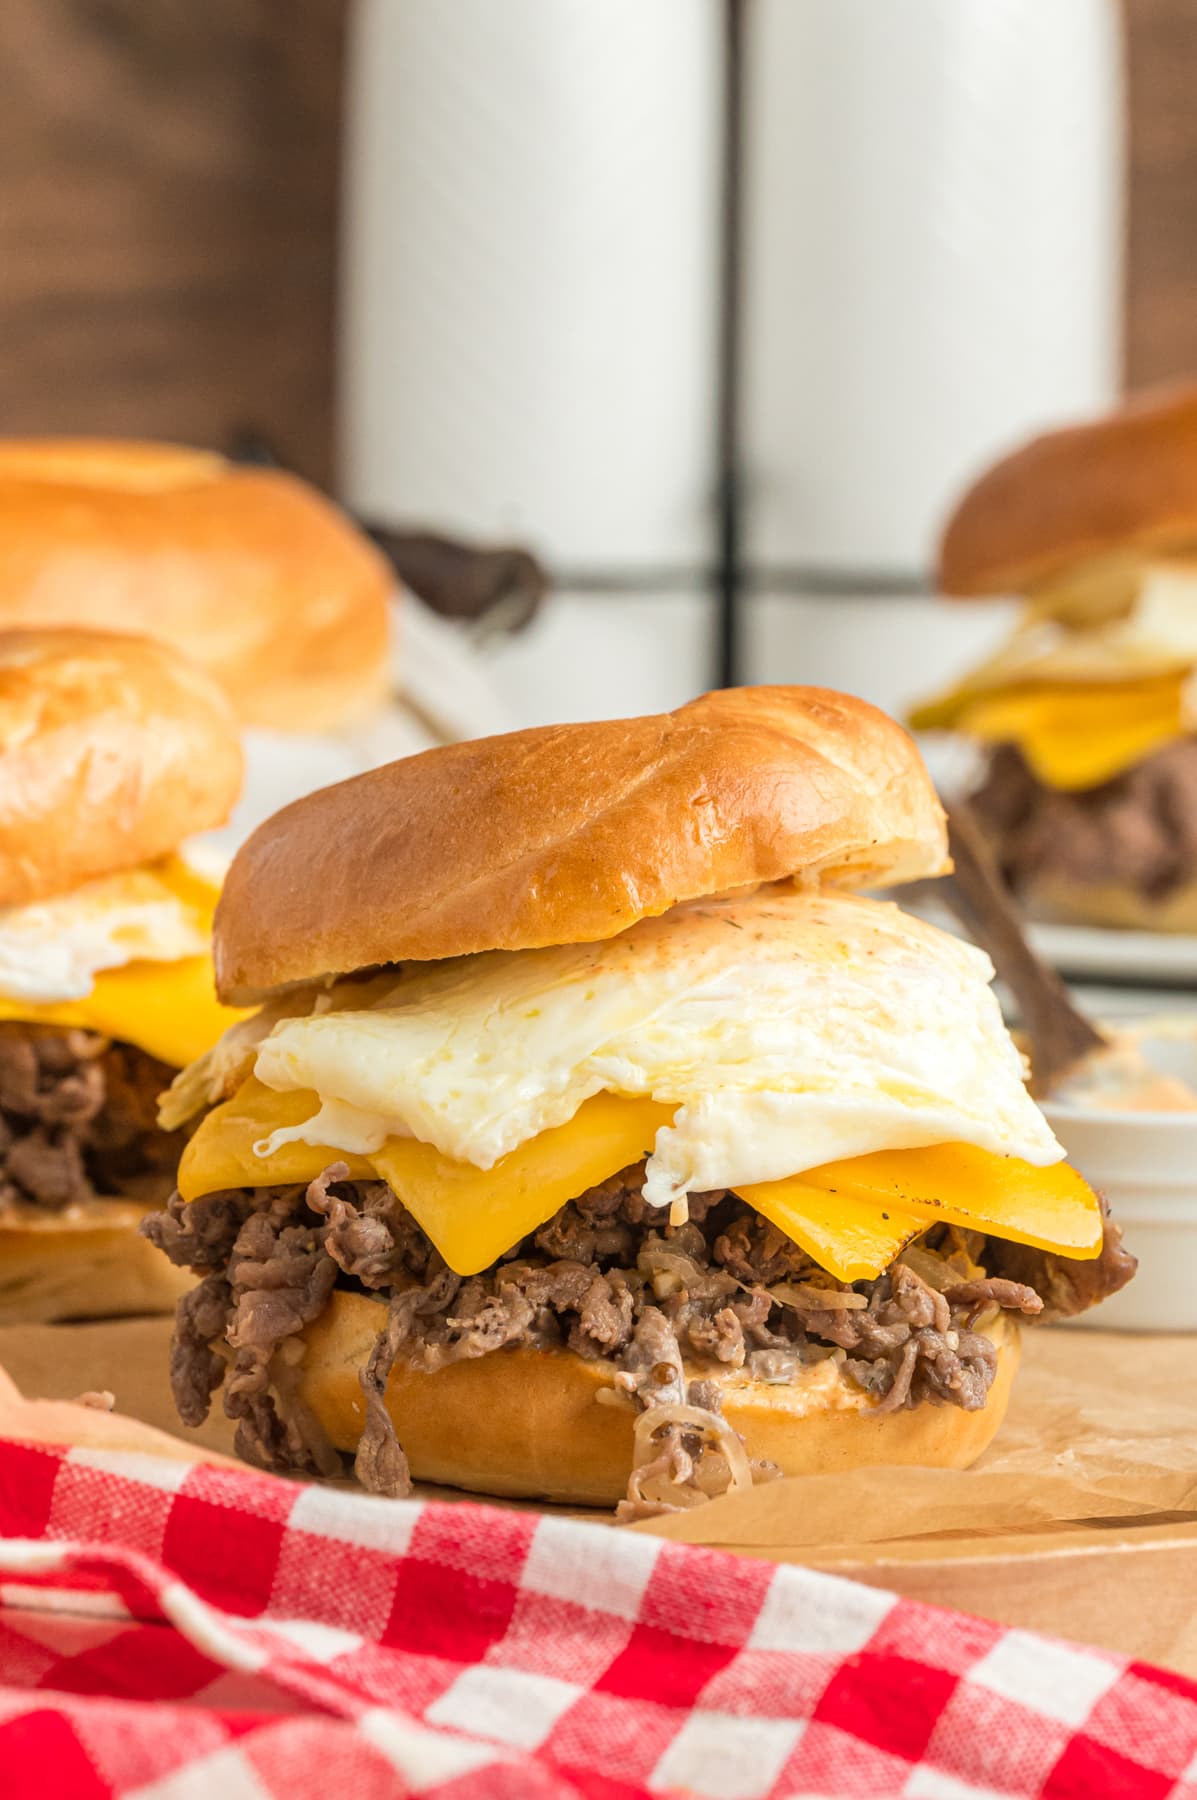 steak egg and cheese bagel served on wooden board